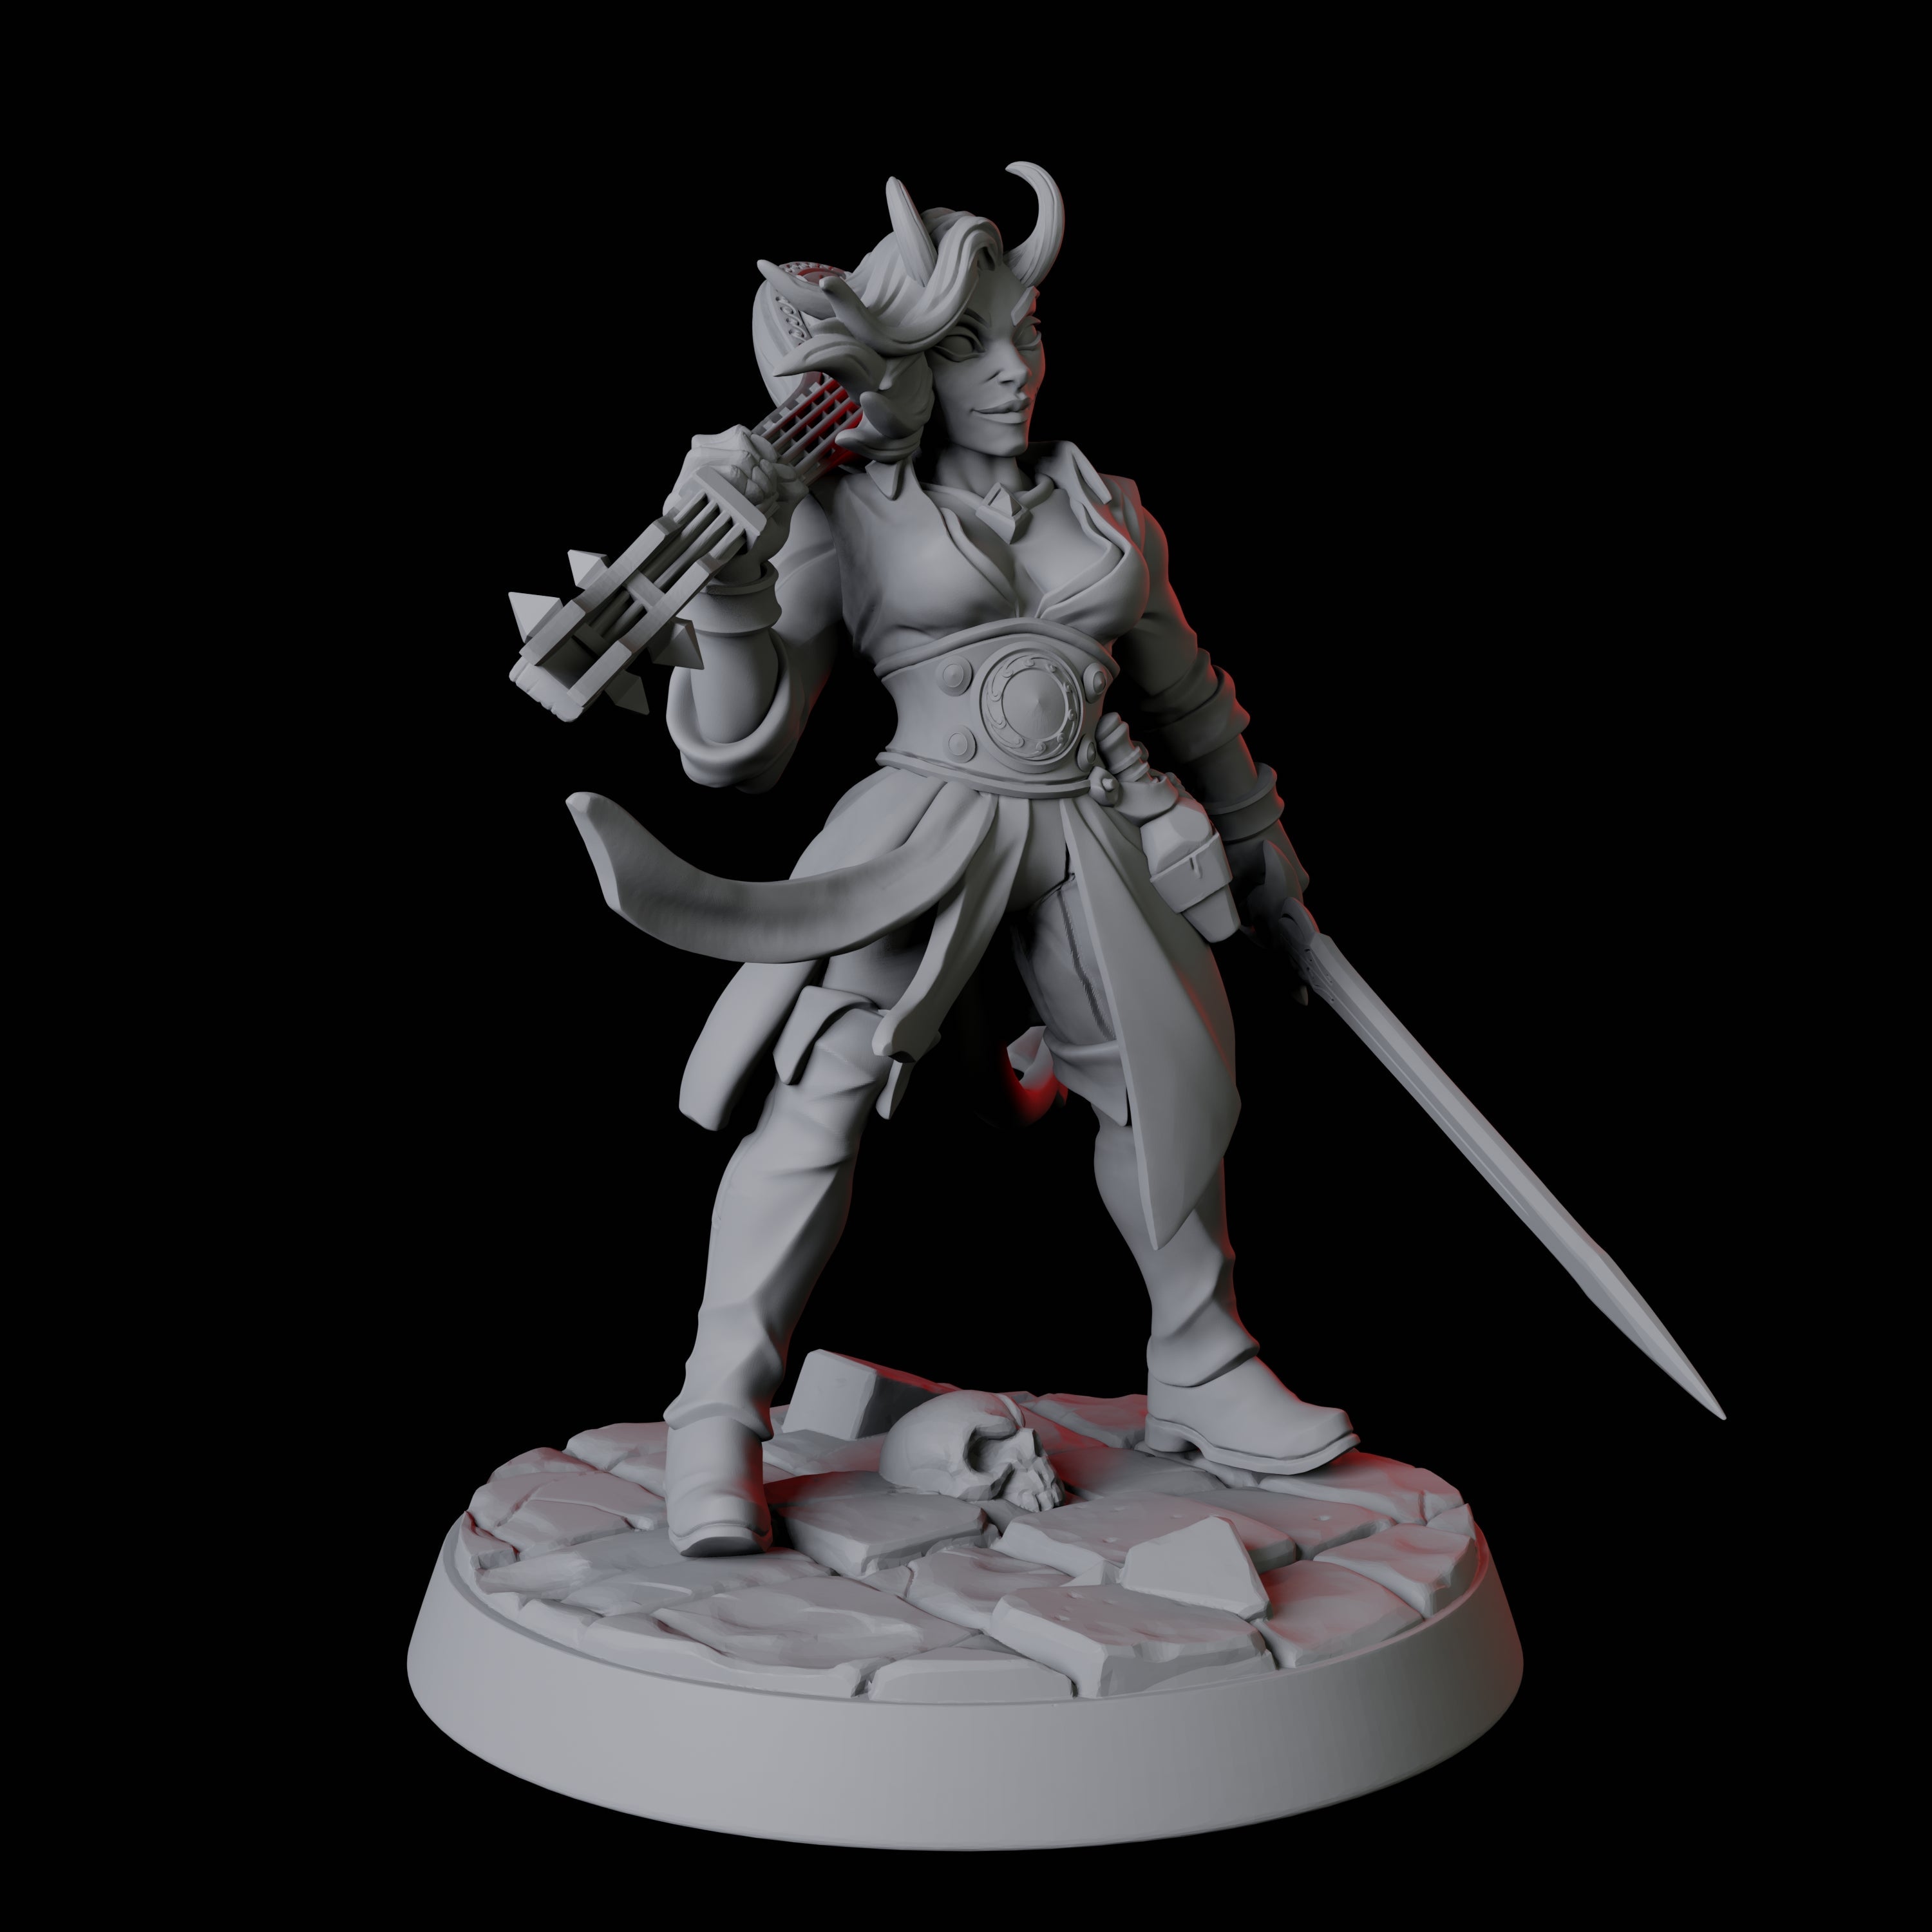 Tiefling Bard E Miniature for Dungeons and Dragons, Pathfinder or other TTRPGs